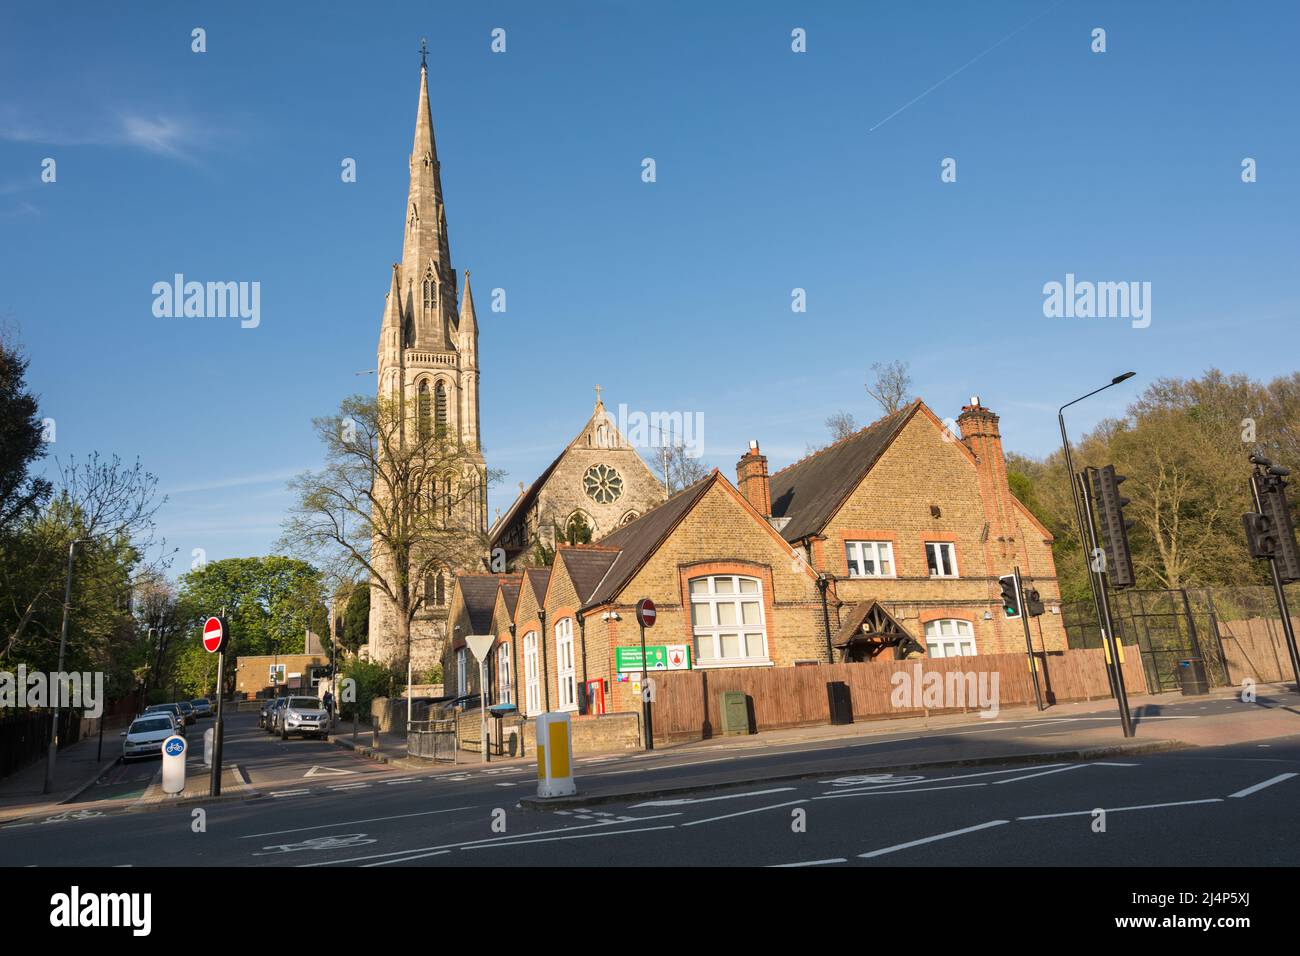 The Grade II* listed Gothic Revival church tower and spire of Holy Trinity Church, Ponsonby Road, Roehampton, London, SW15, England, UK Stock Photo